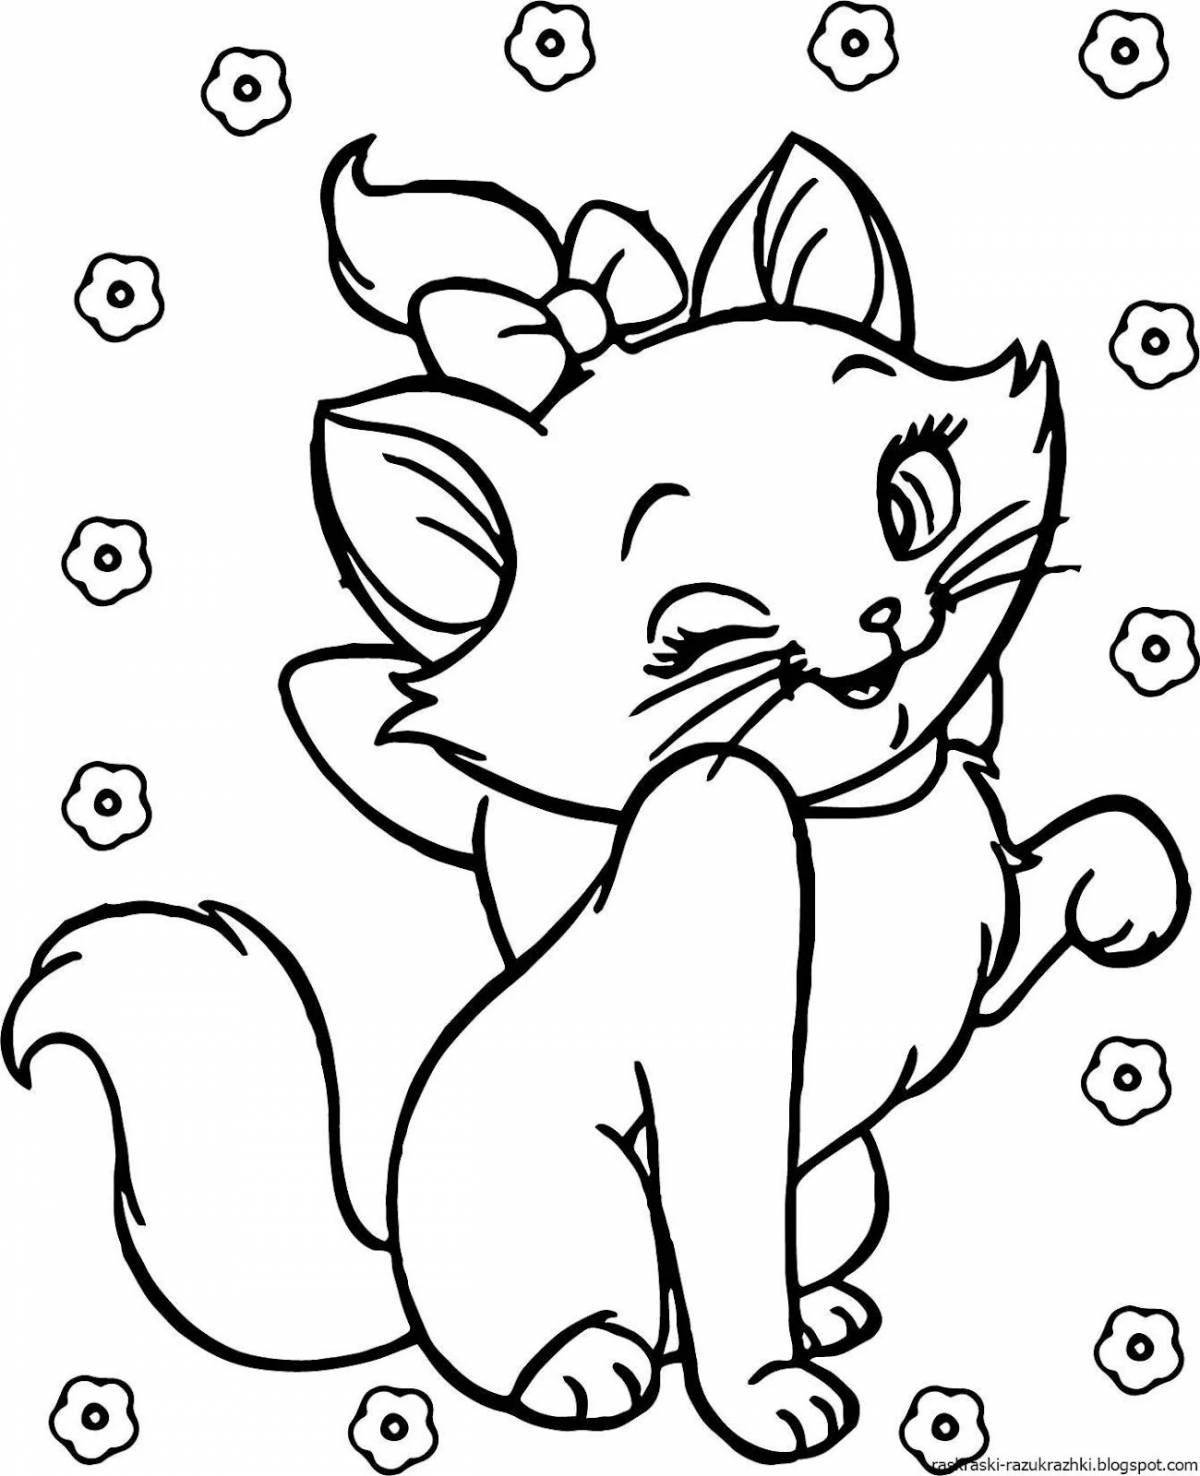 Playful mrrr meow coloring page